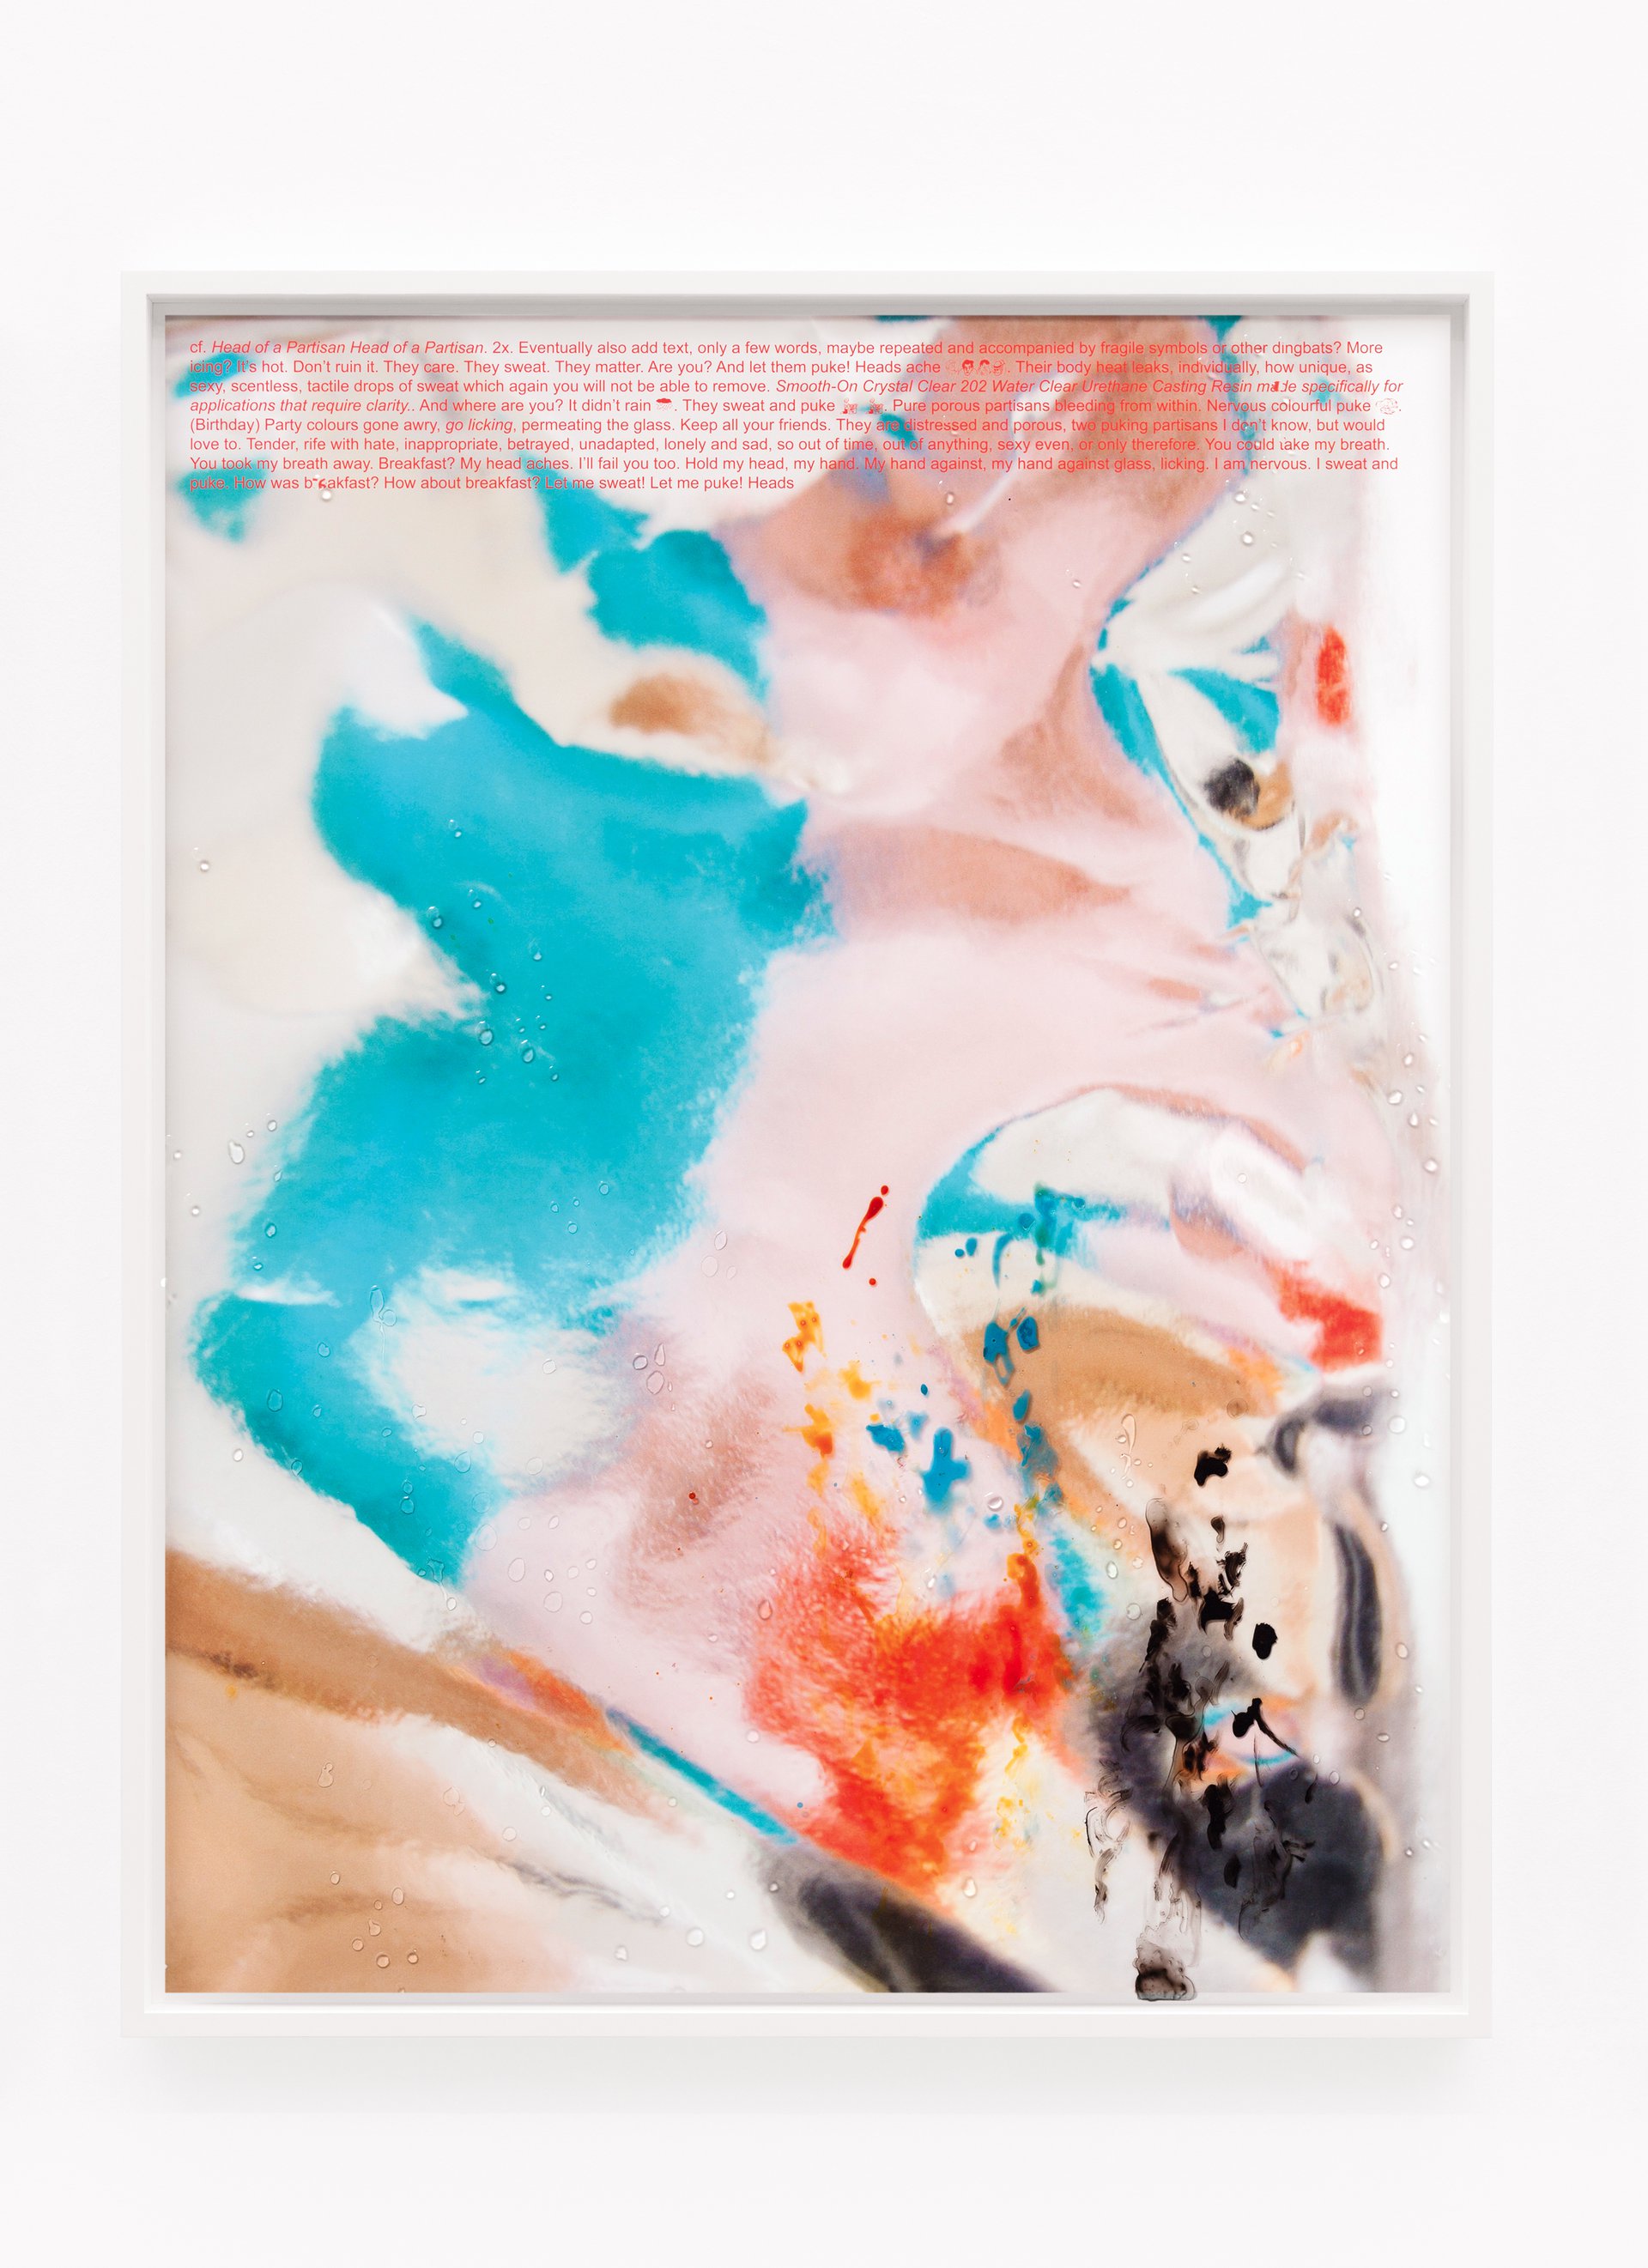 Lisa HolzerHead of a Partisan, 2015Crystal Clear 202/1 polyurethane and acrylic paint on glass, pigment prints on cotton paper92 x 72 cm